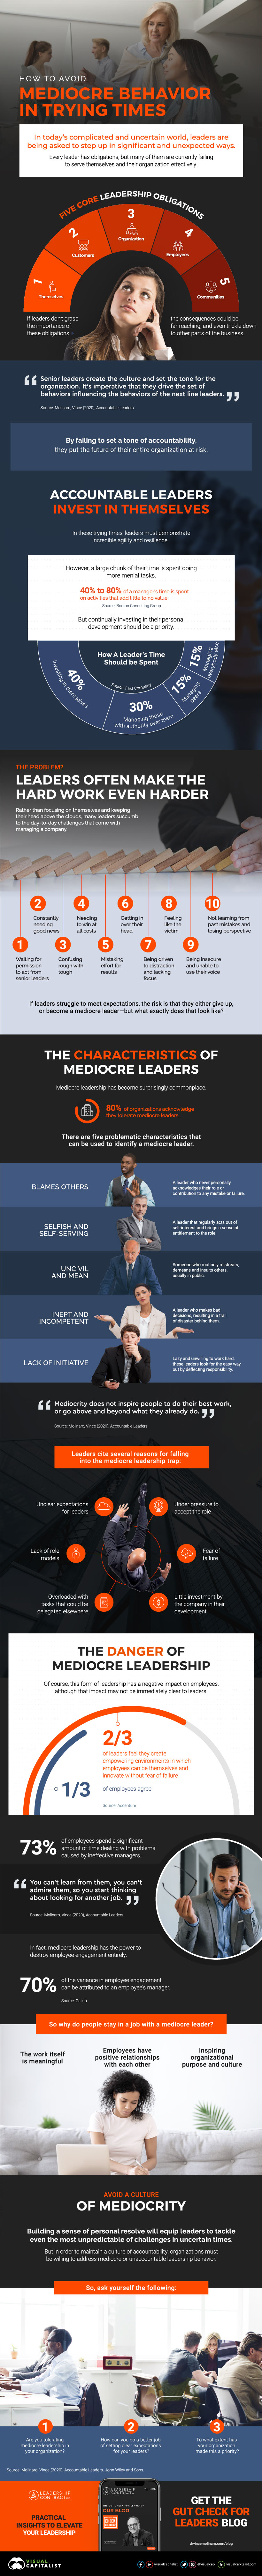 mediocre leadership infographic